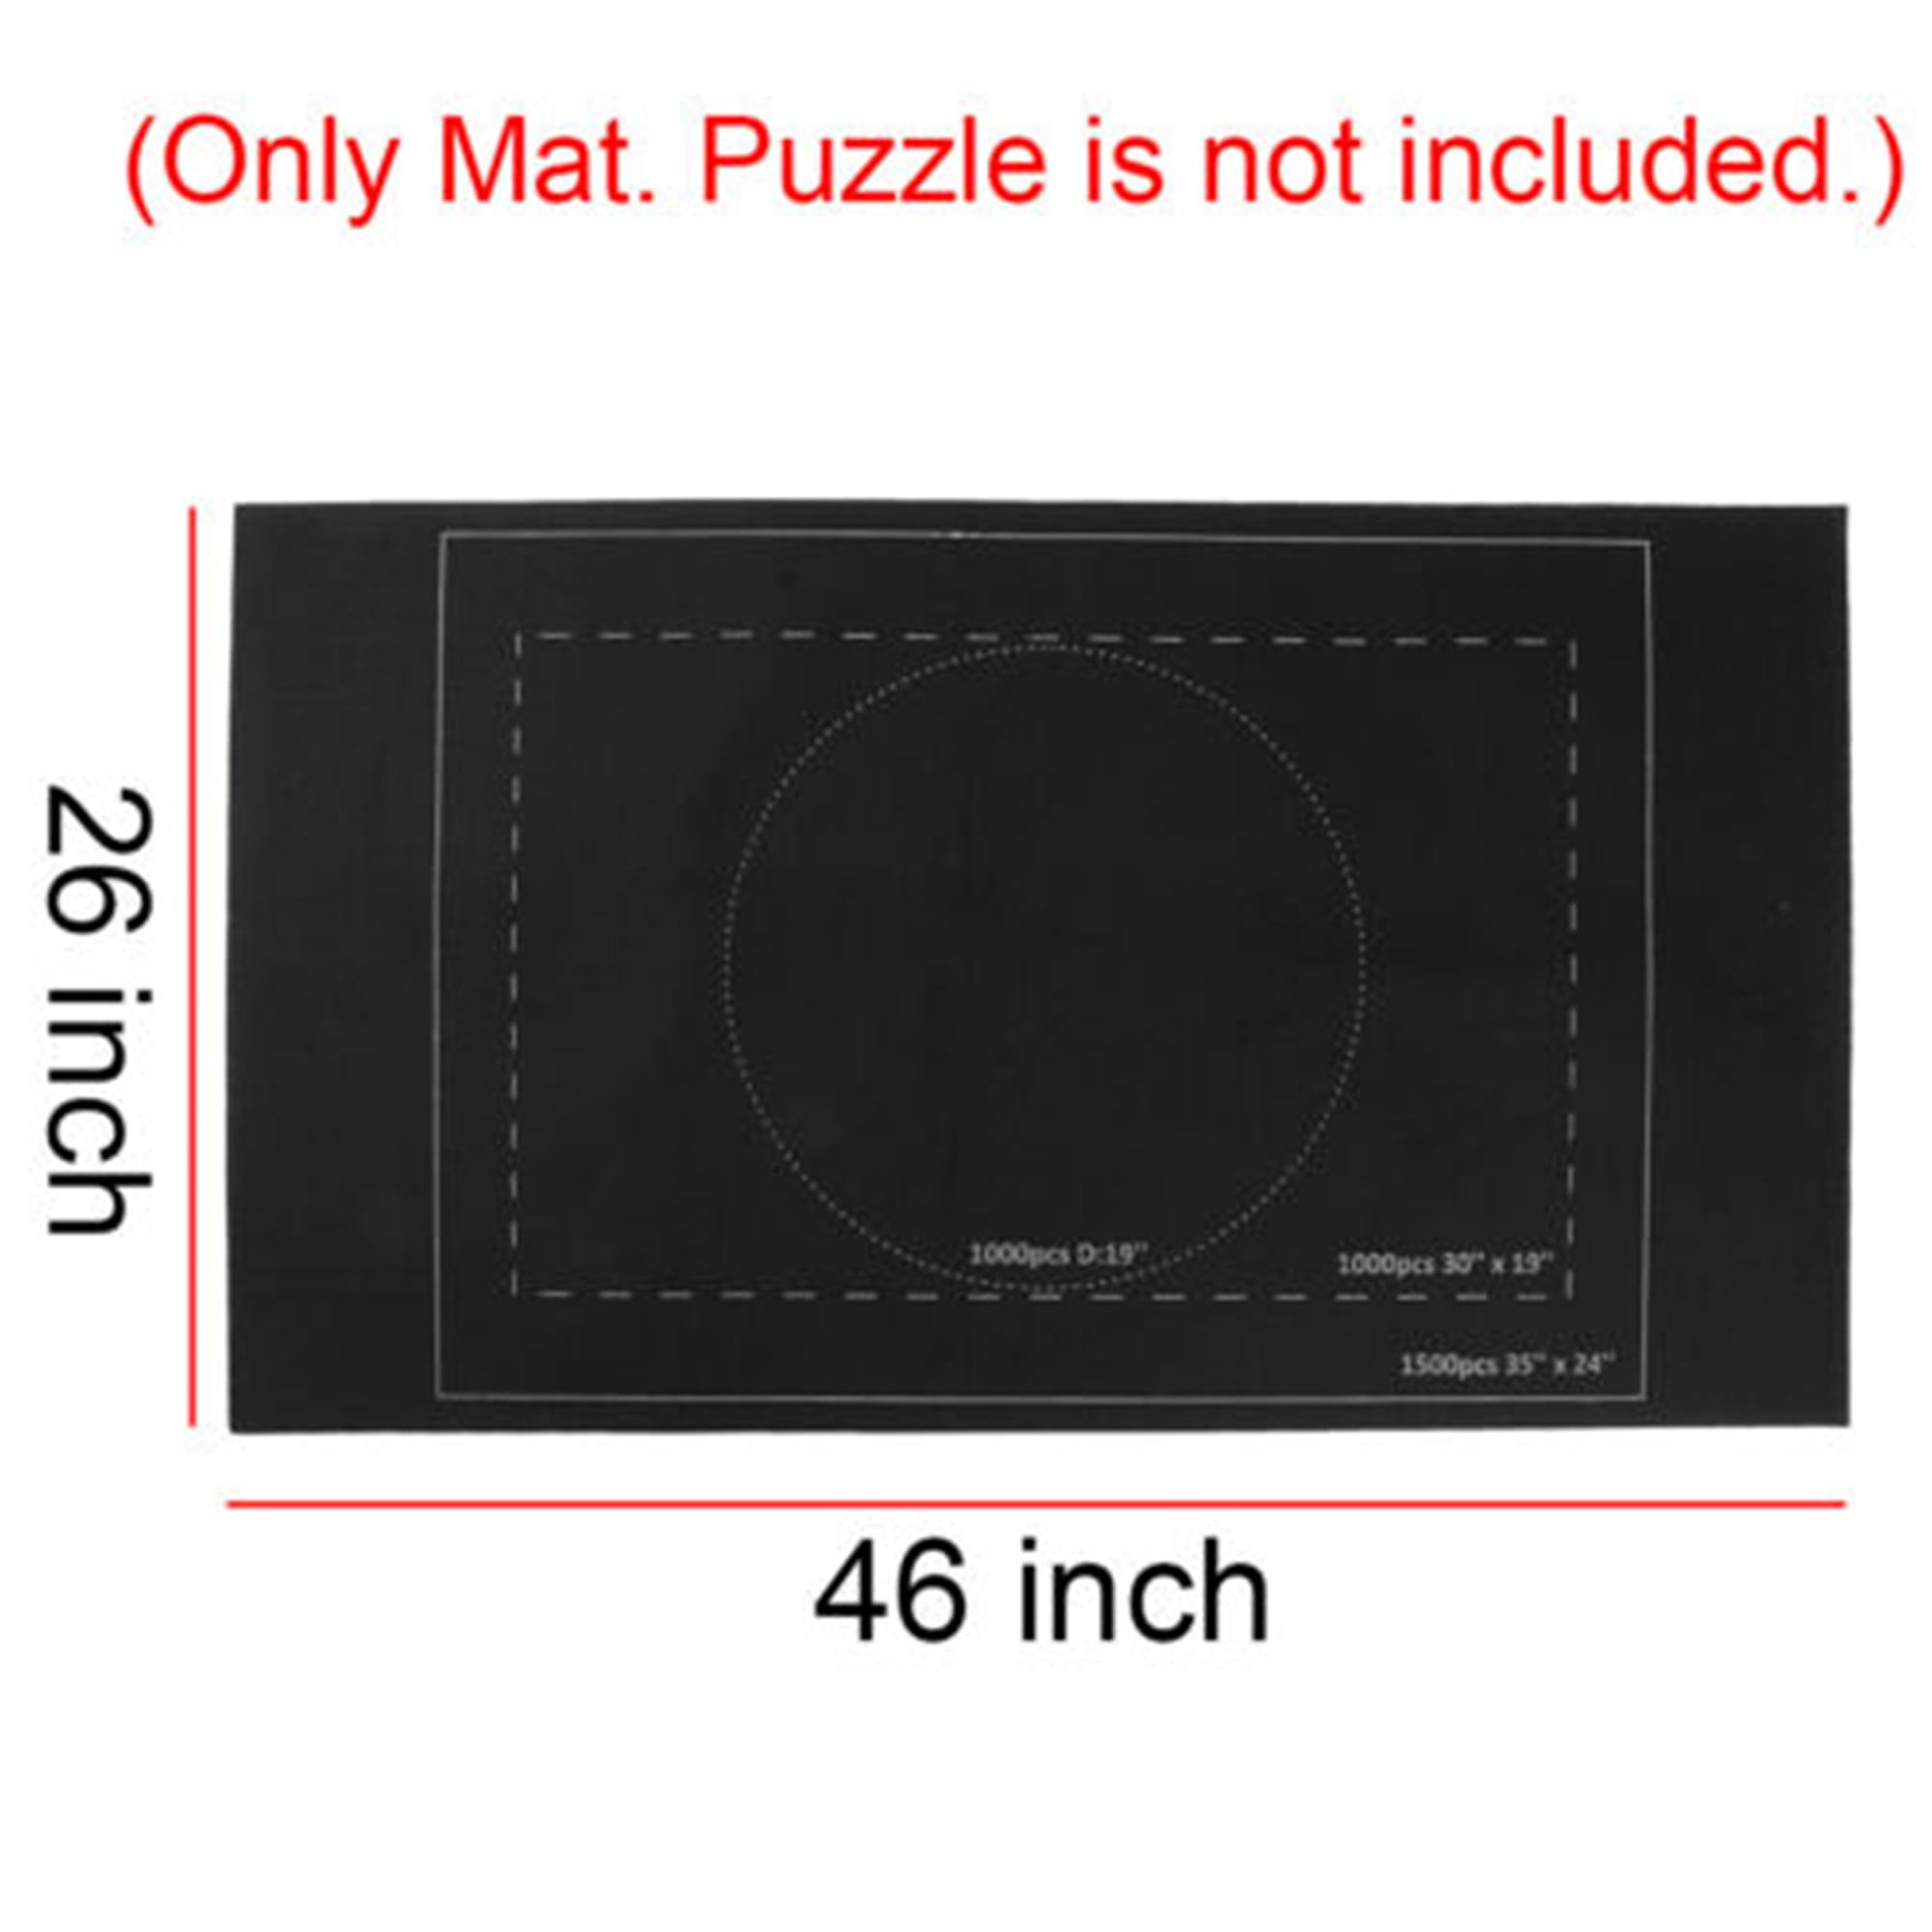 JUMBO JIGSAW PUZZLE FELT ROLL UP STORAGE MAT FOR UP TO 1500 PIECES 